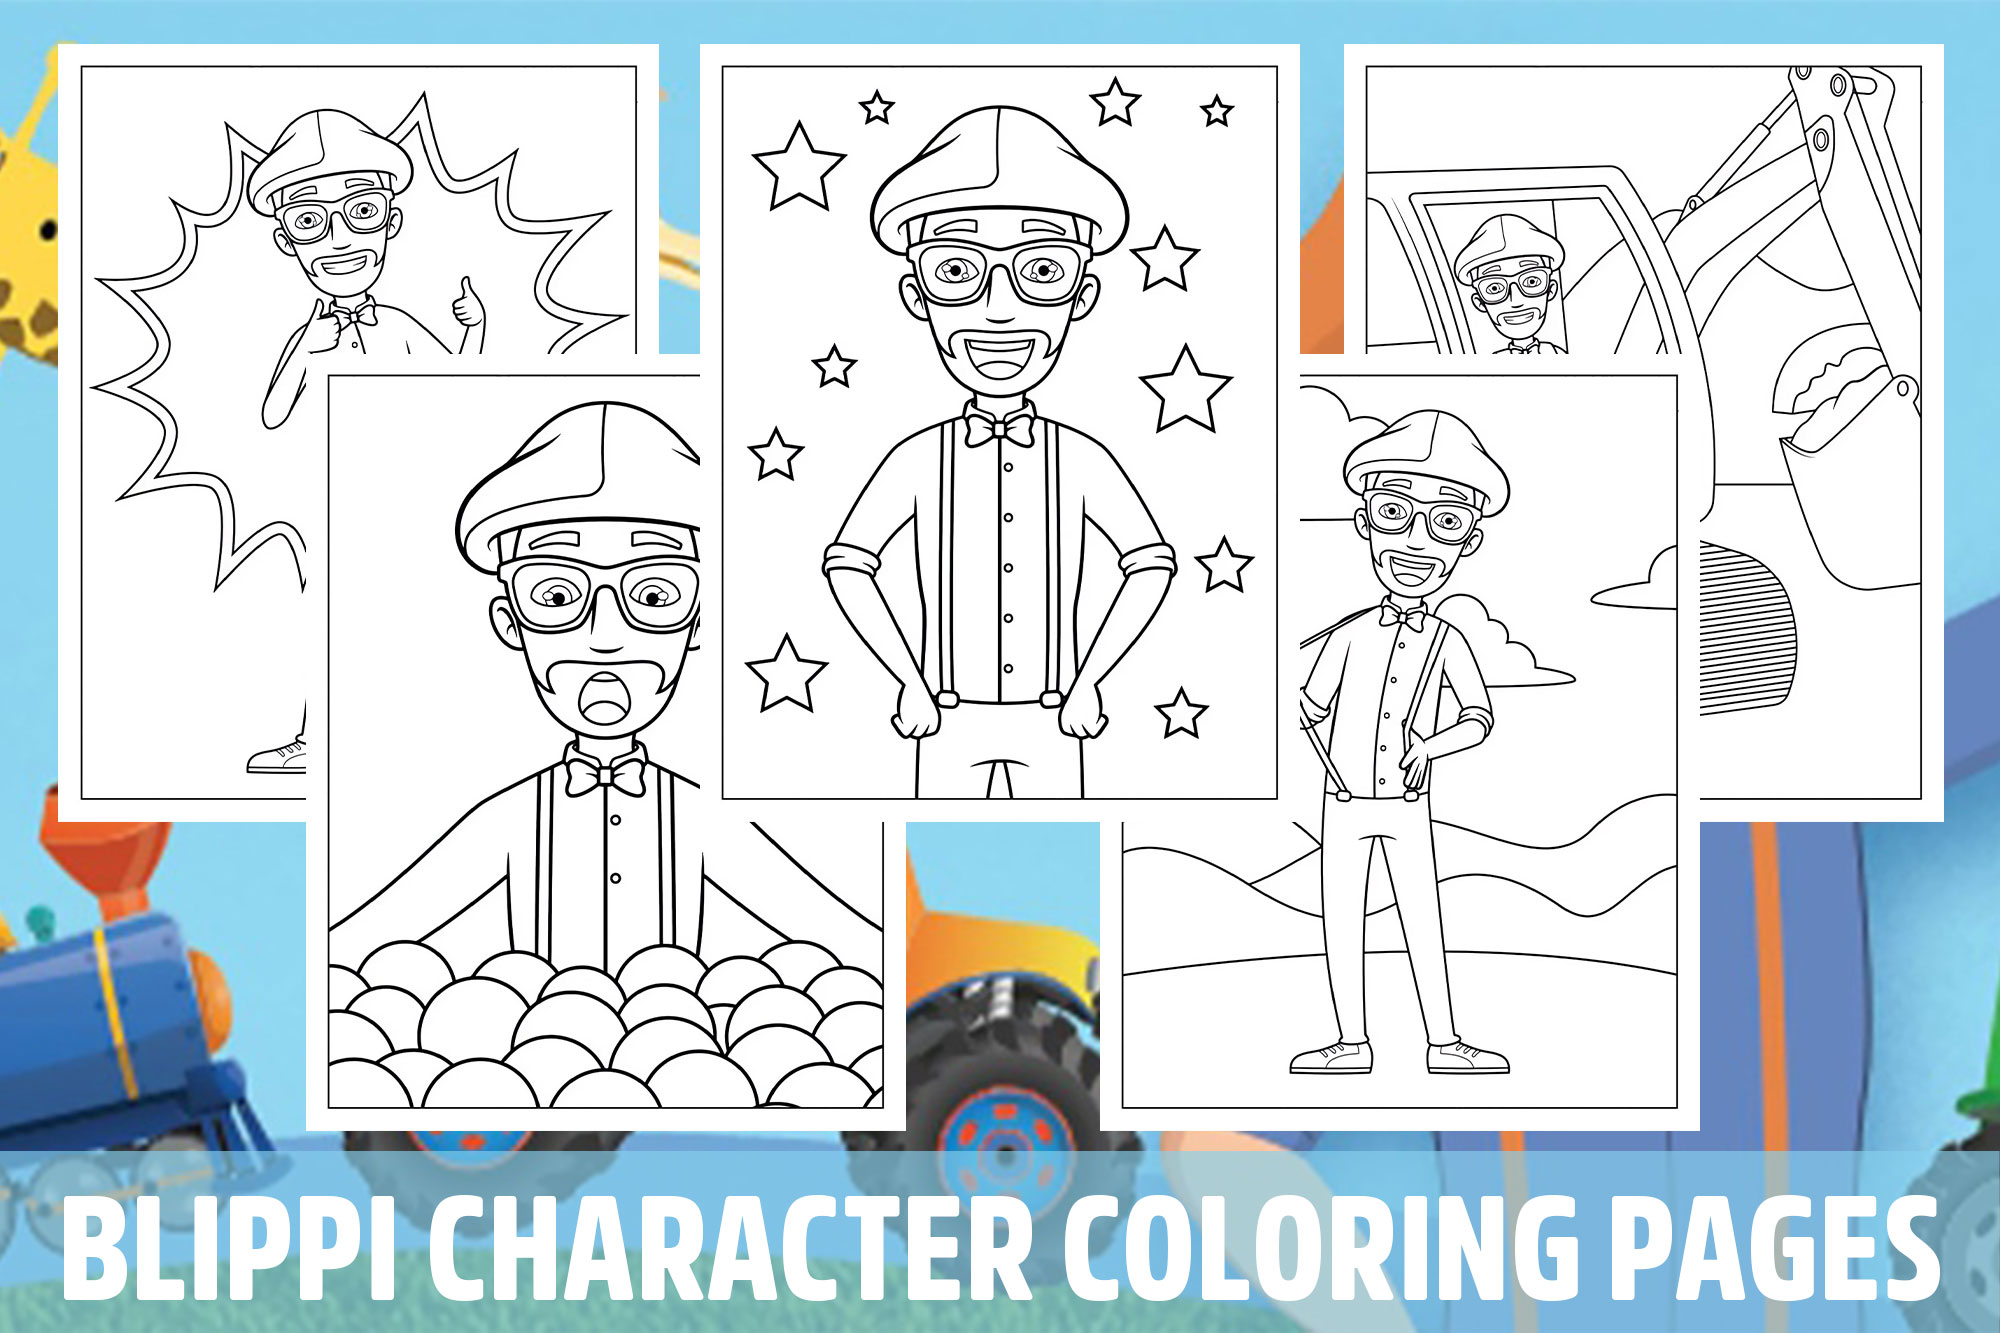 Blippi character coloring pages for kids girls boys teens birthday school activity made by teachers